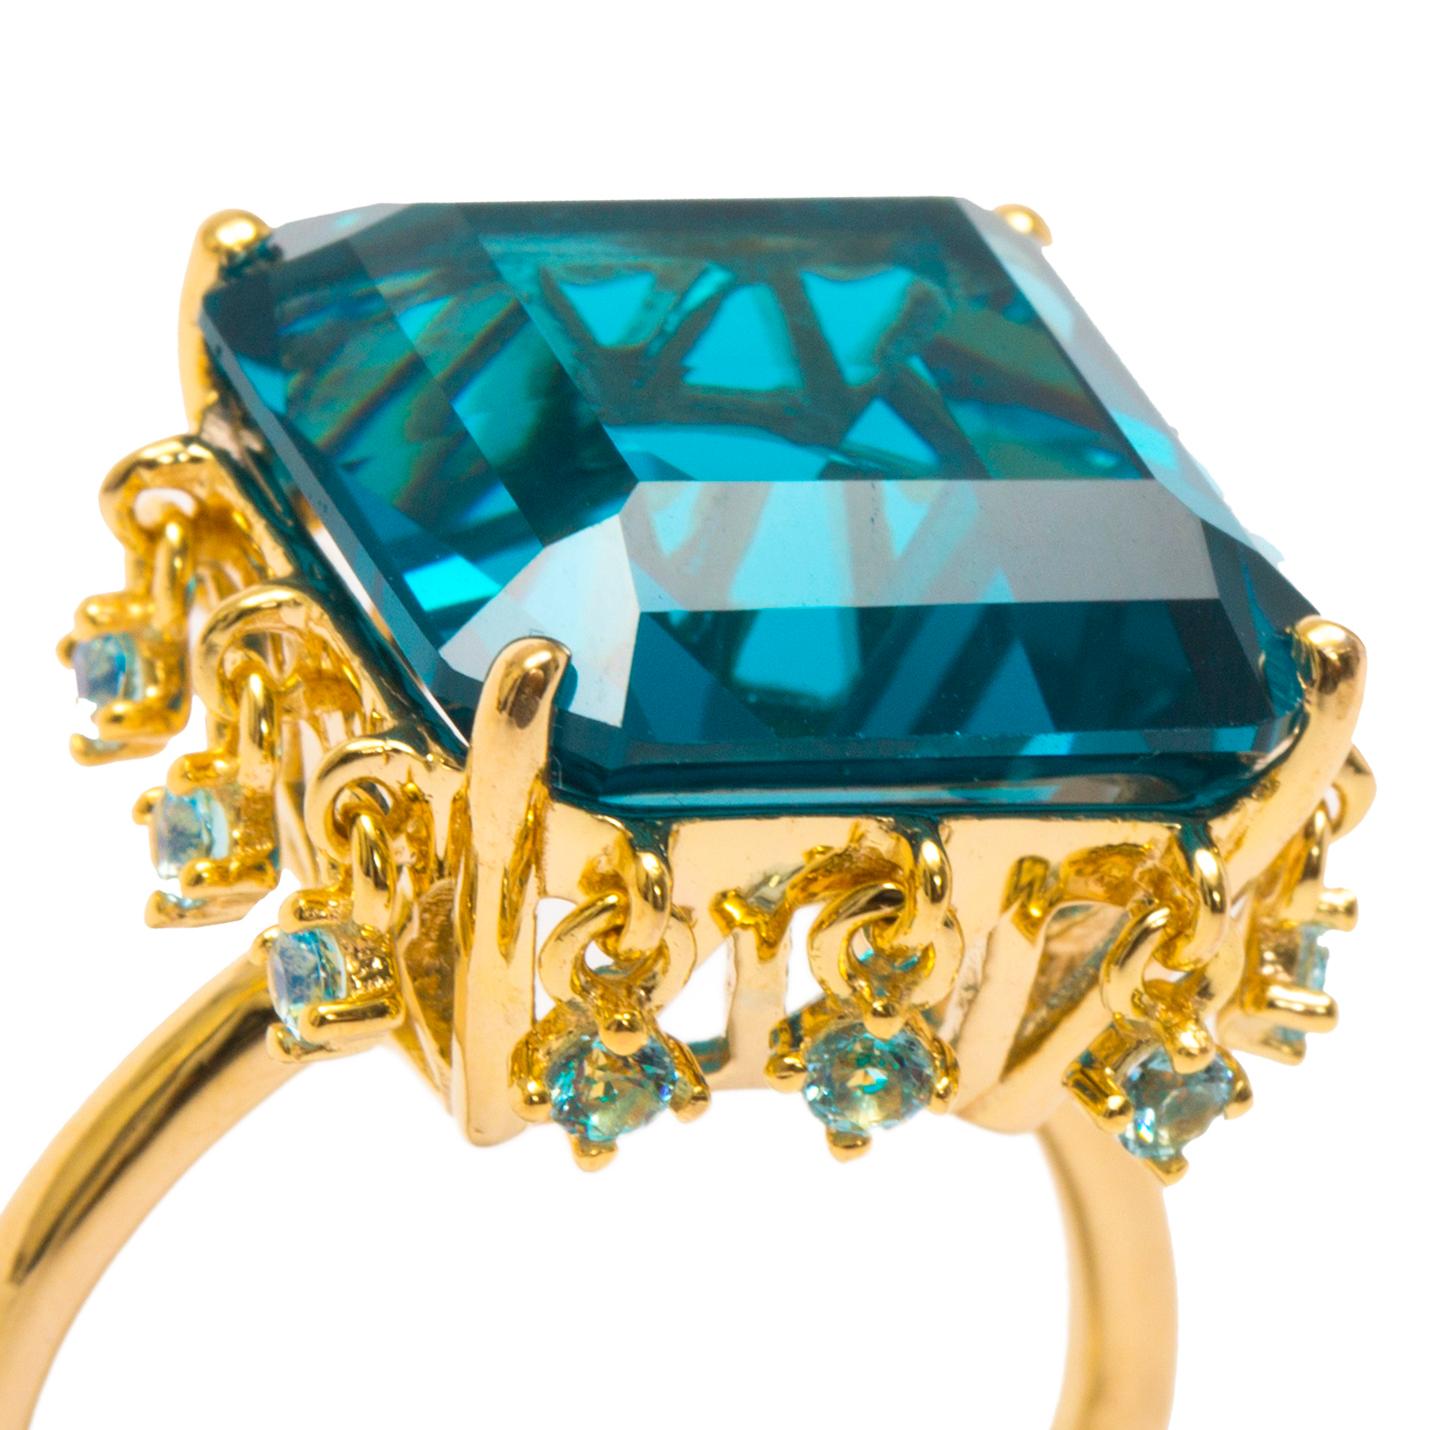 Part of our new Malikat = Queens collection- inspired by the ruling females of ancient Egypt. A dazzling ring to signify the queen's crown. Hand crafted vermeil gold with hand cut statement blue topaz and charm stones around it. May the beauty and